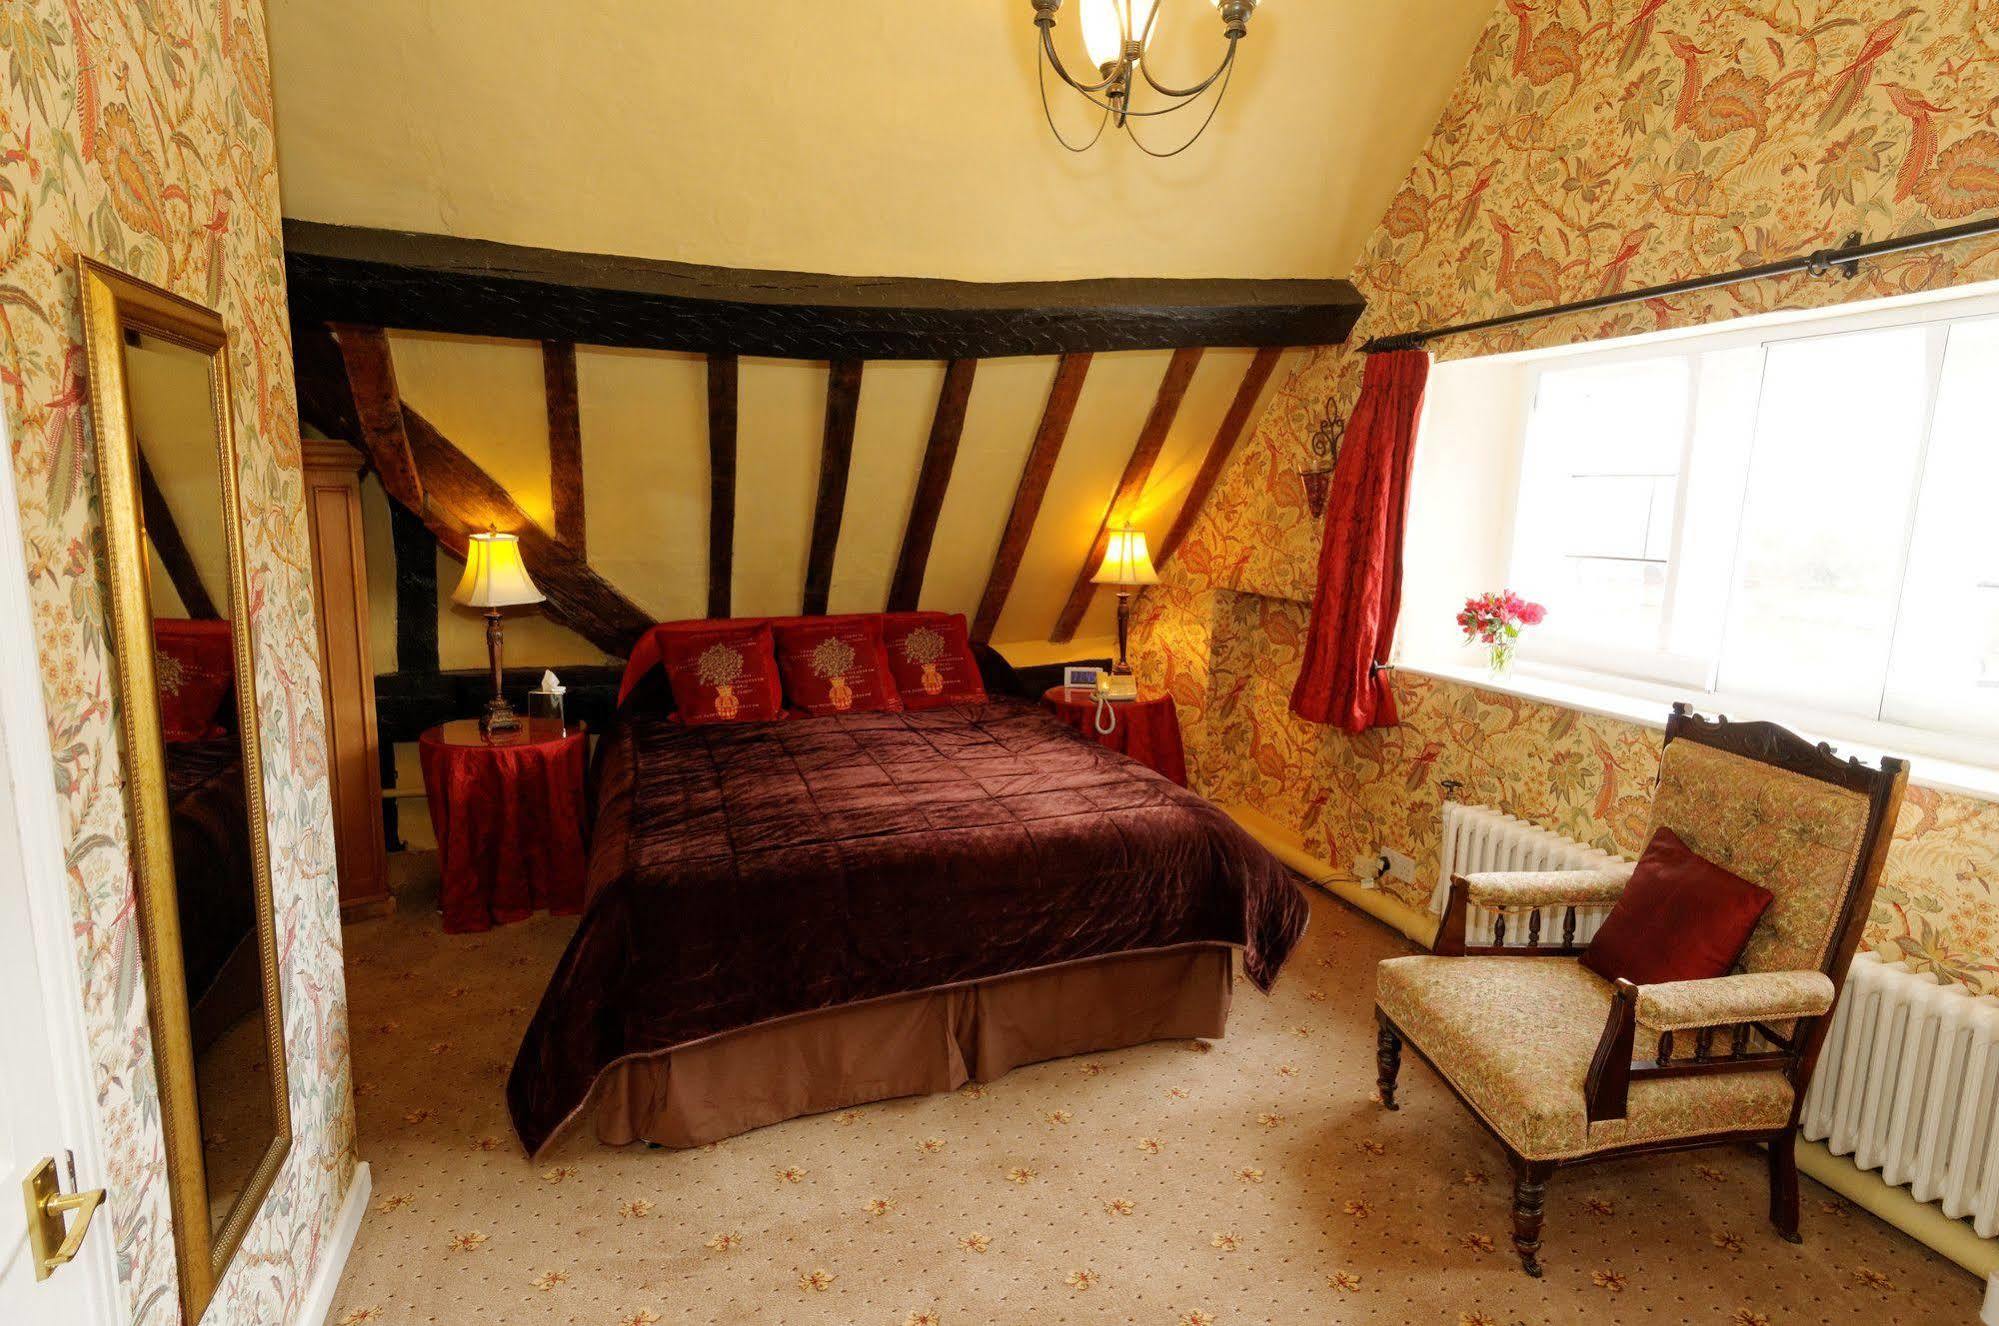 Wilton Court Restaurant With Rooms Ross-on-Wye Екстер'єр фото